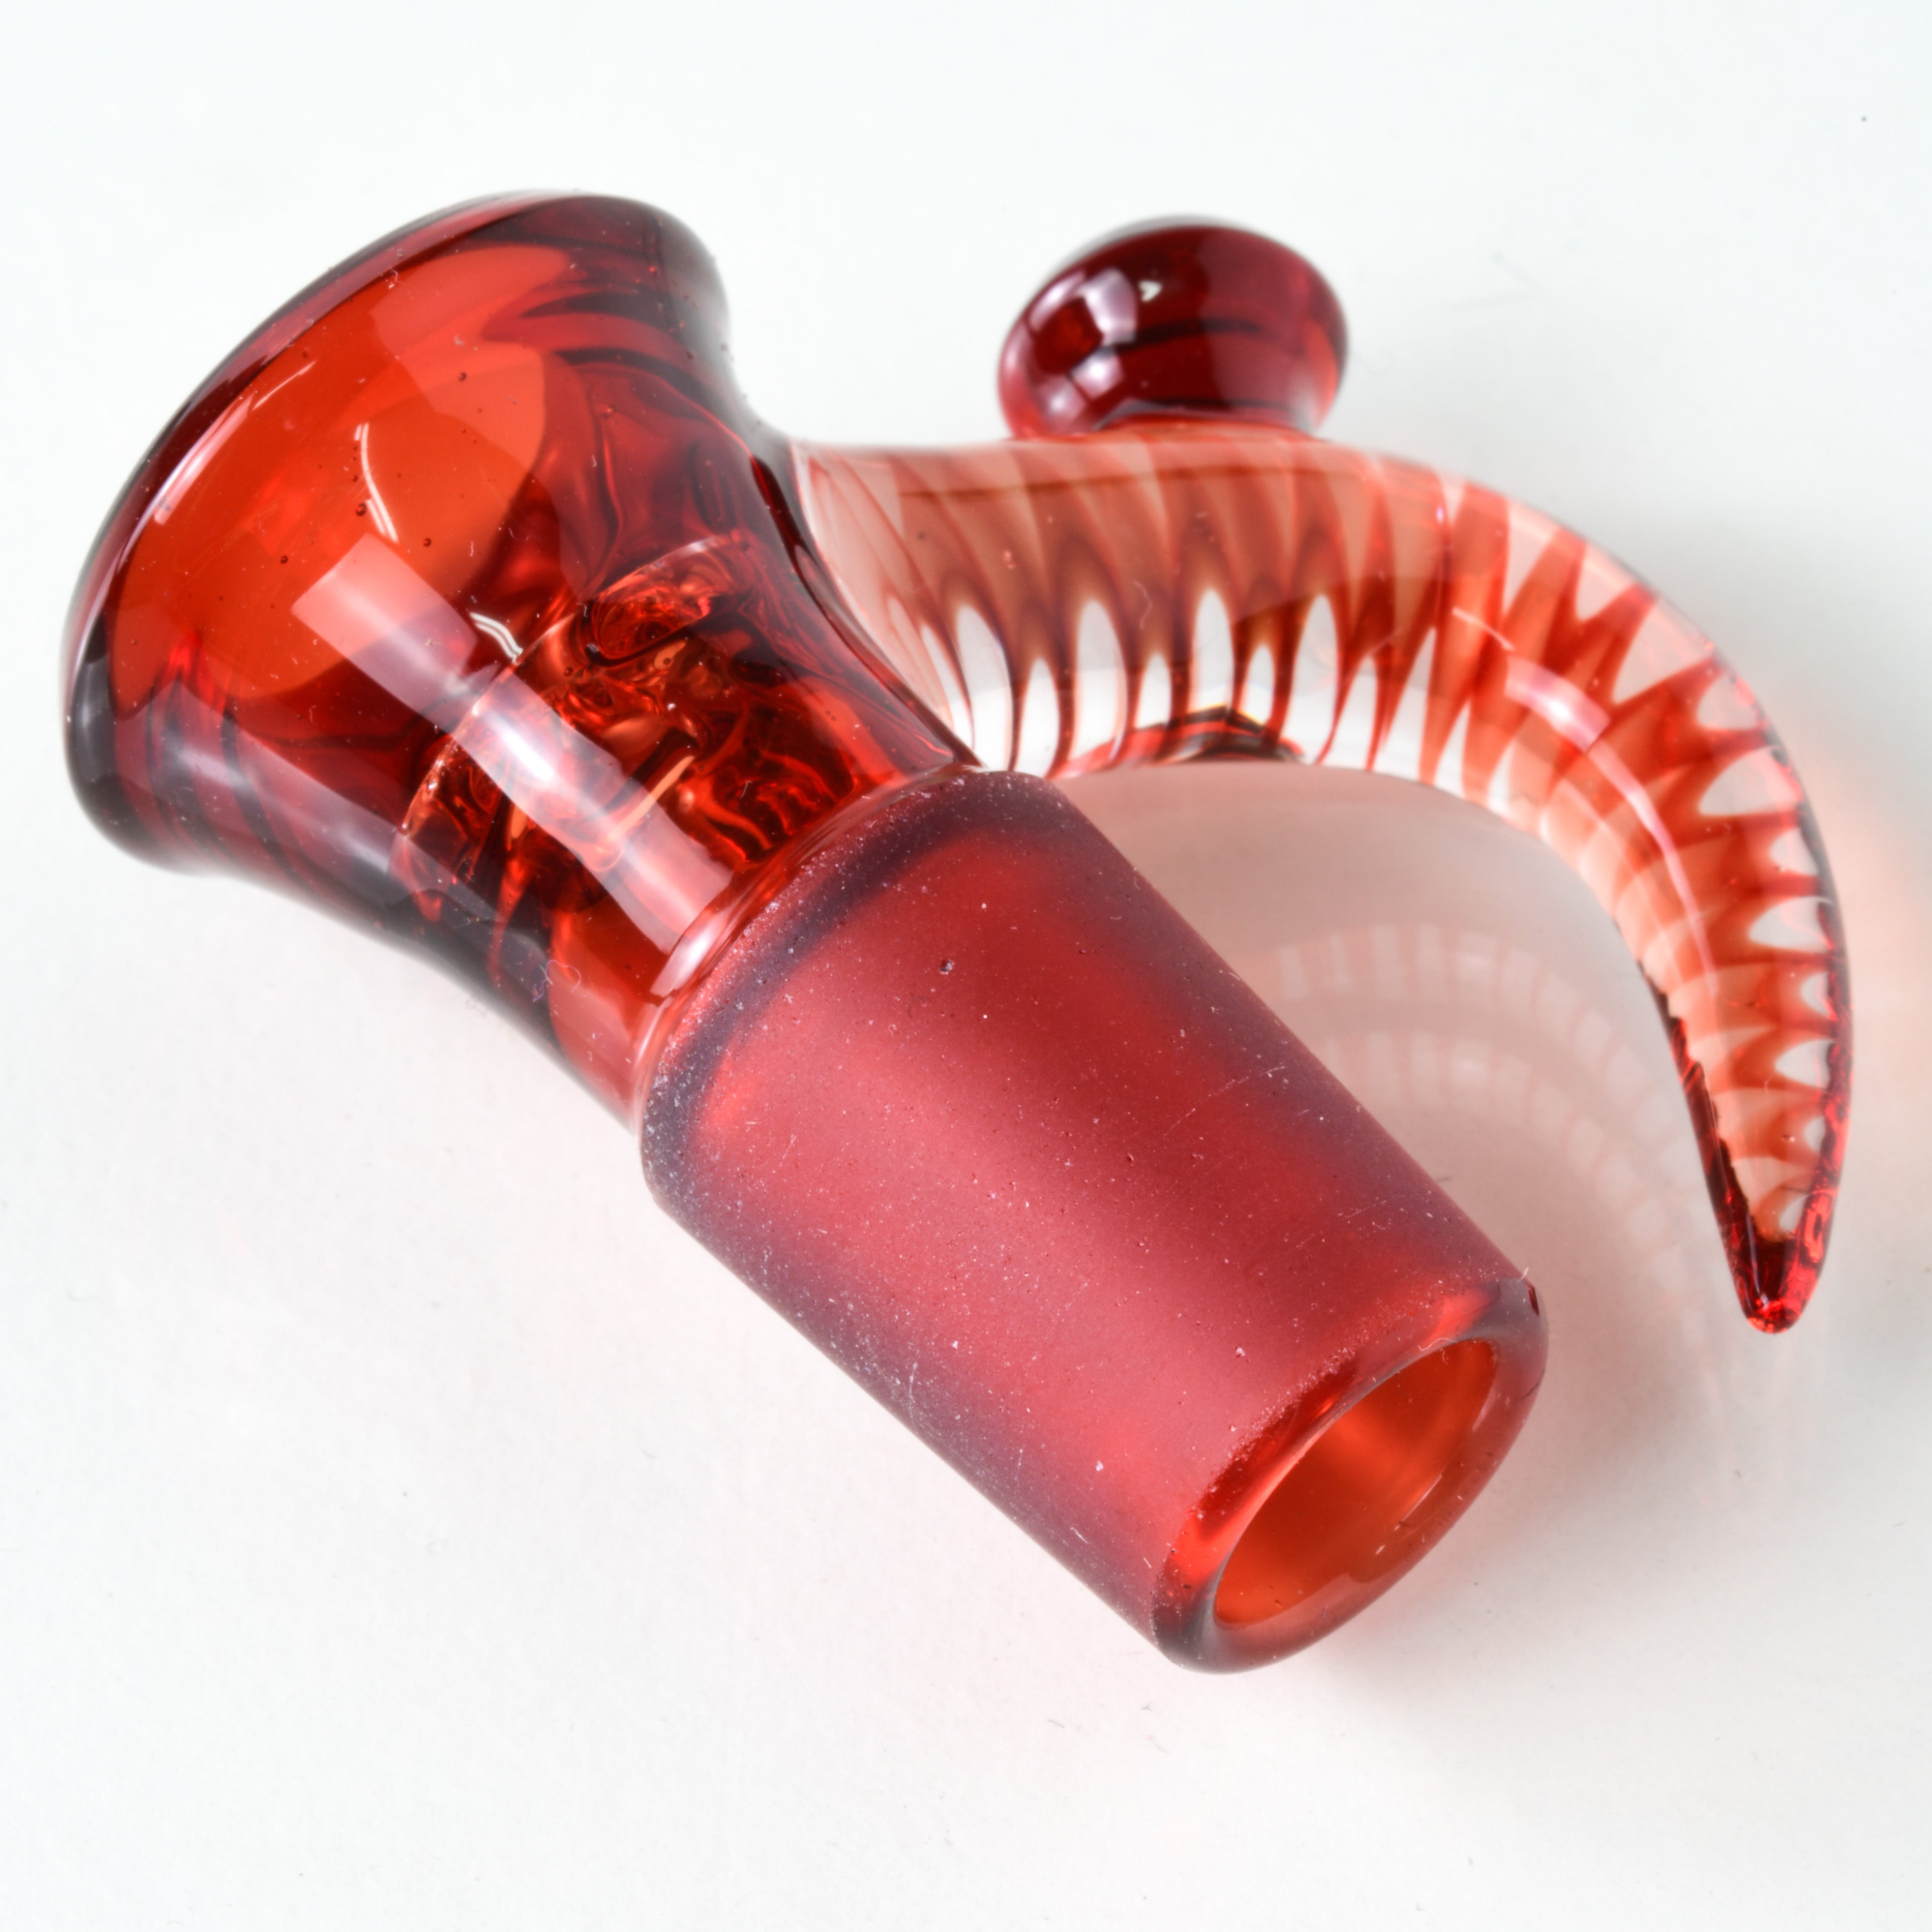 Jamms Glass - 18mm 4 Hole Fully Worked Slide W/ Cane Handle - Pomegranate